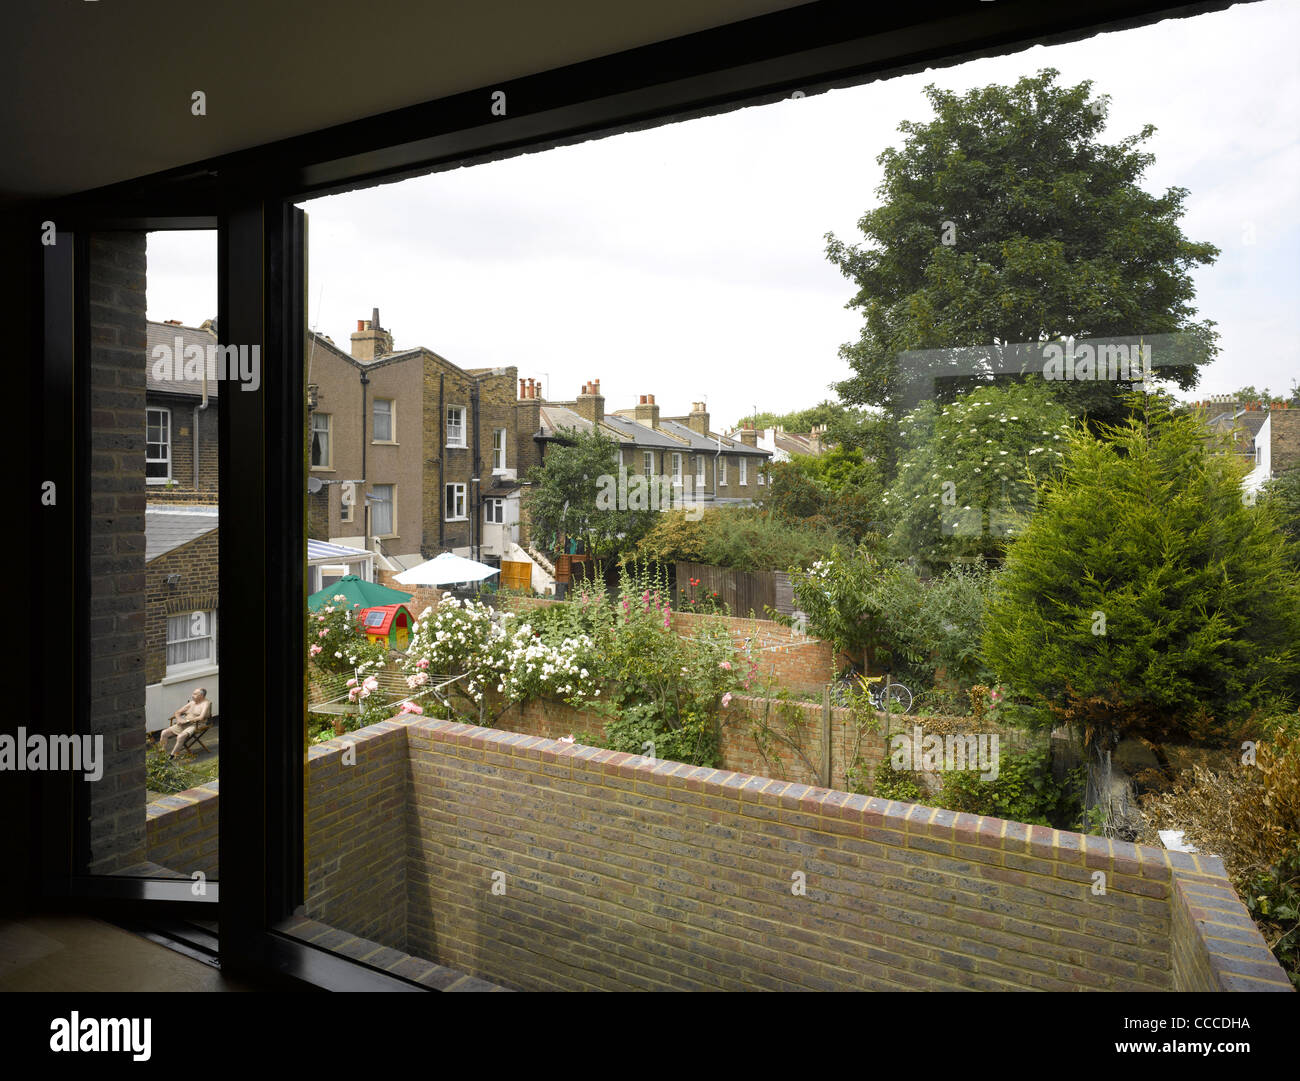 HOUSE ON KINGS GROVE-DUGGAN MORRIS ARCHITECTS-LONDON-VIEW FROM REAR BEDROOM Stock Photo